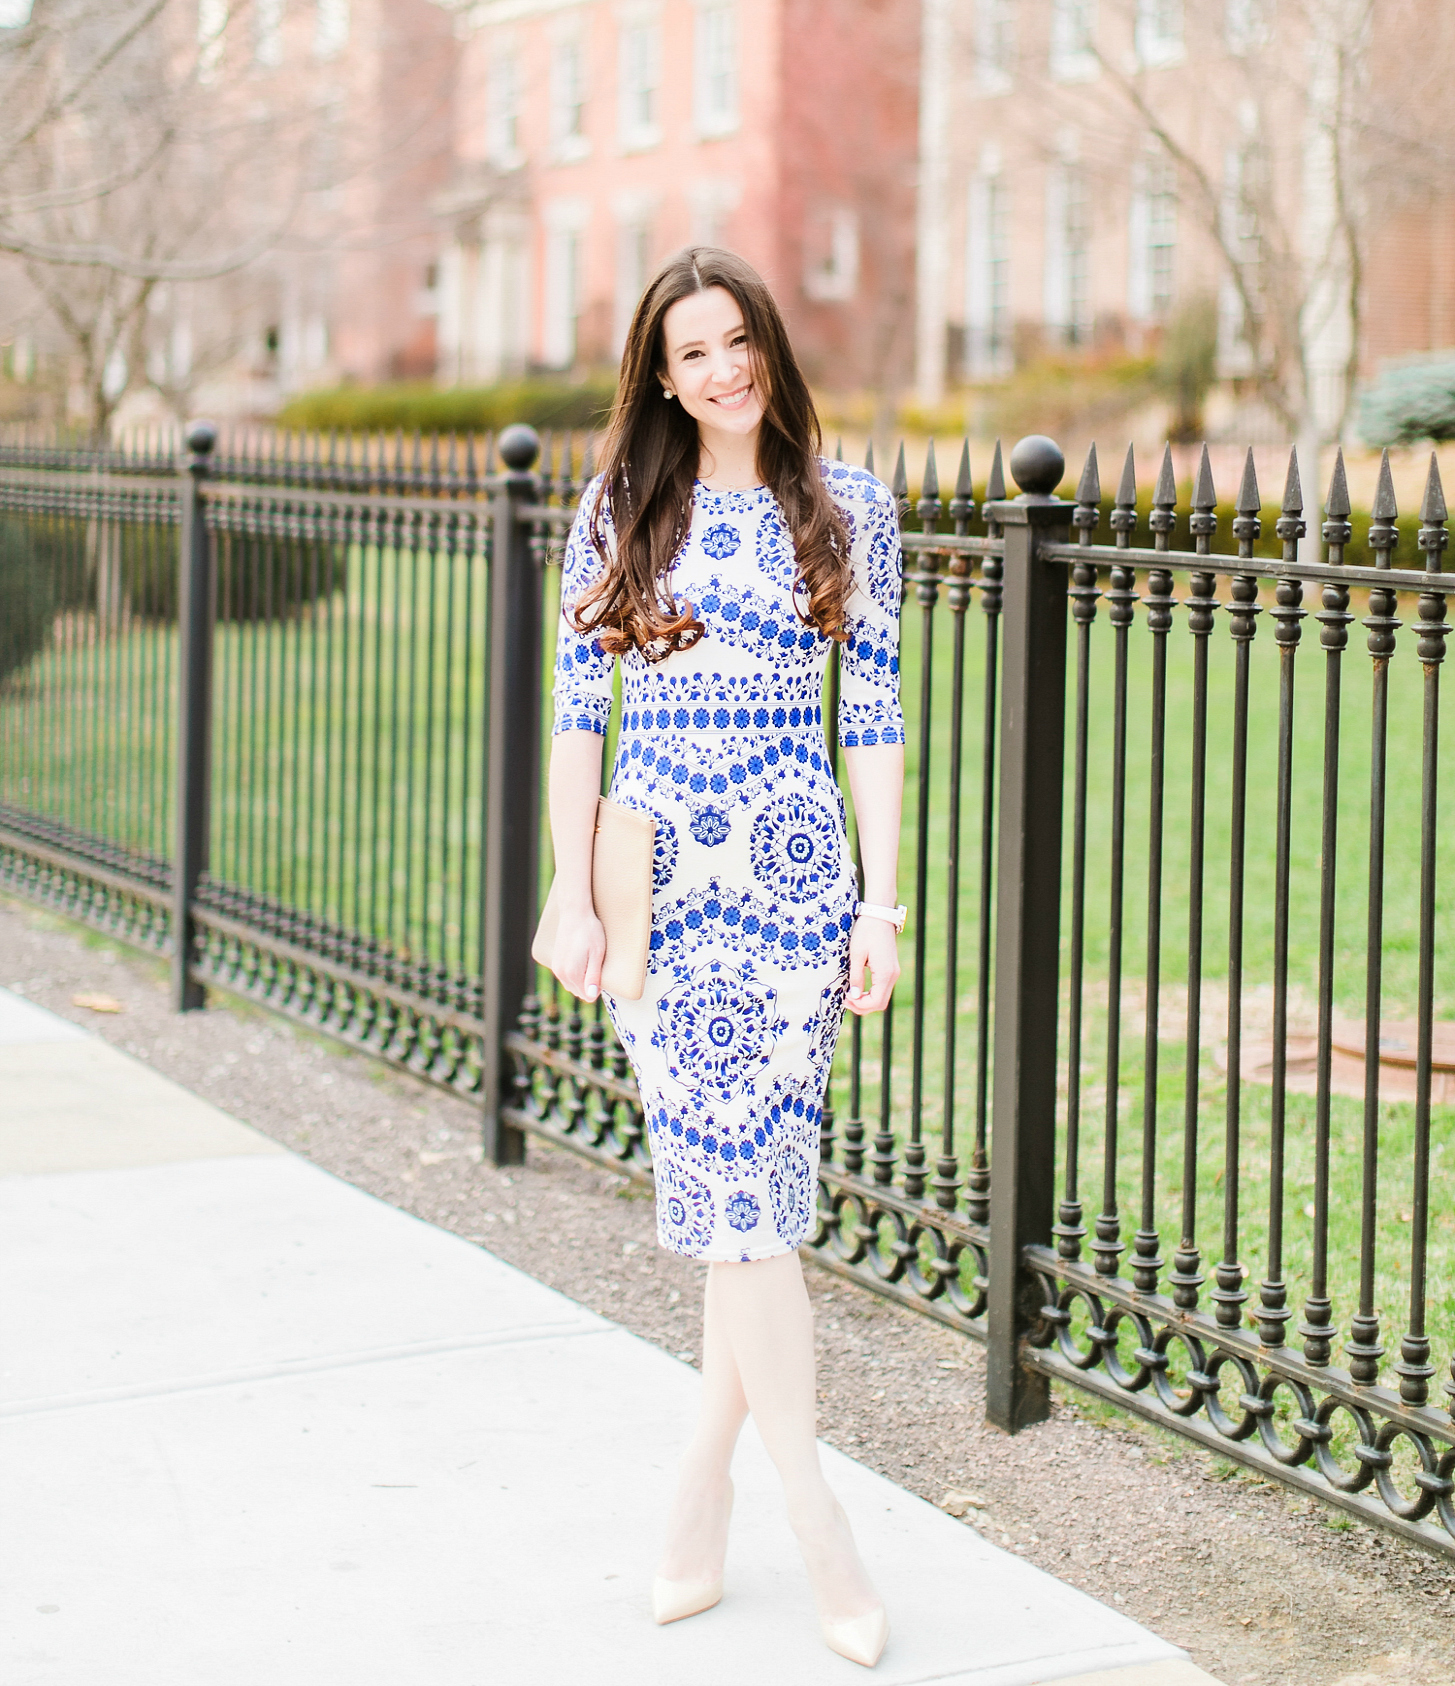 Dress Like Kate Middleton: An Affordable Taj Mahal Dress Replica for Your Spring Wardrobe by southern fashion blogger Stephanie Ziajka from Diary of a Debutante, Affordable Kate Middleton Taj Mahal Dress Replica, Naeem Khan Taj Mahal dress, Shein porcelain print pencil dress with M. Gemi The Cammeo tan patent leather pumps and a stone GiGi New York Uber clutch